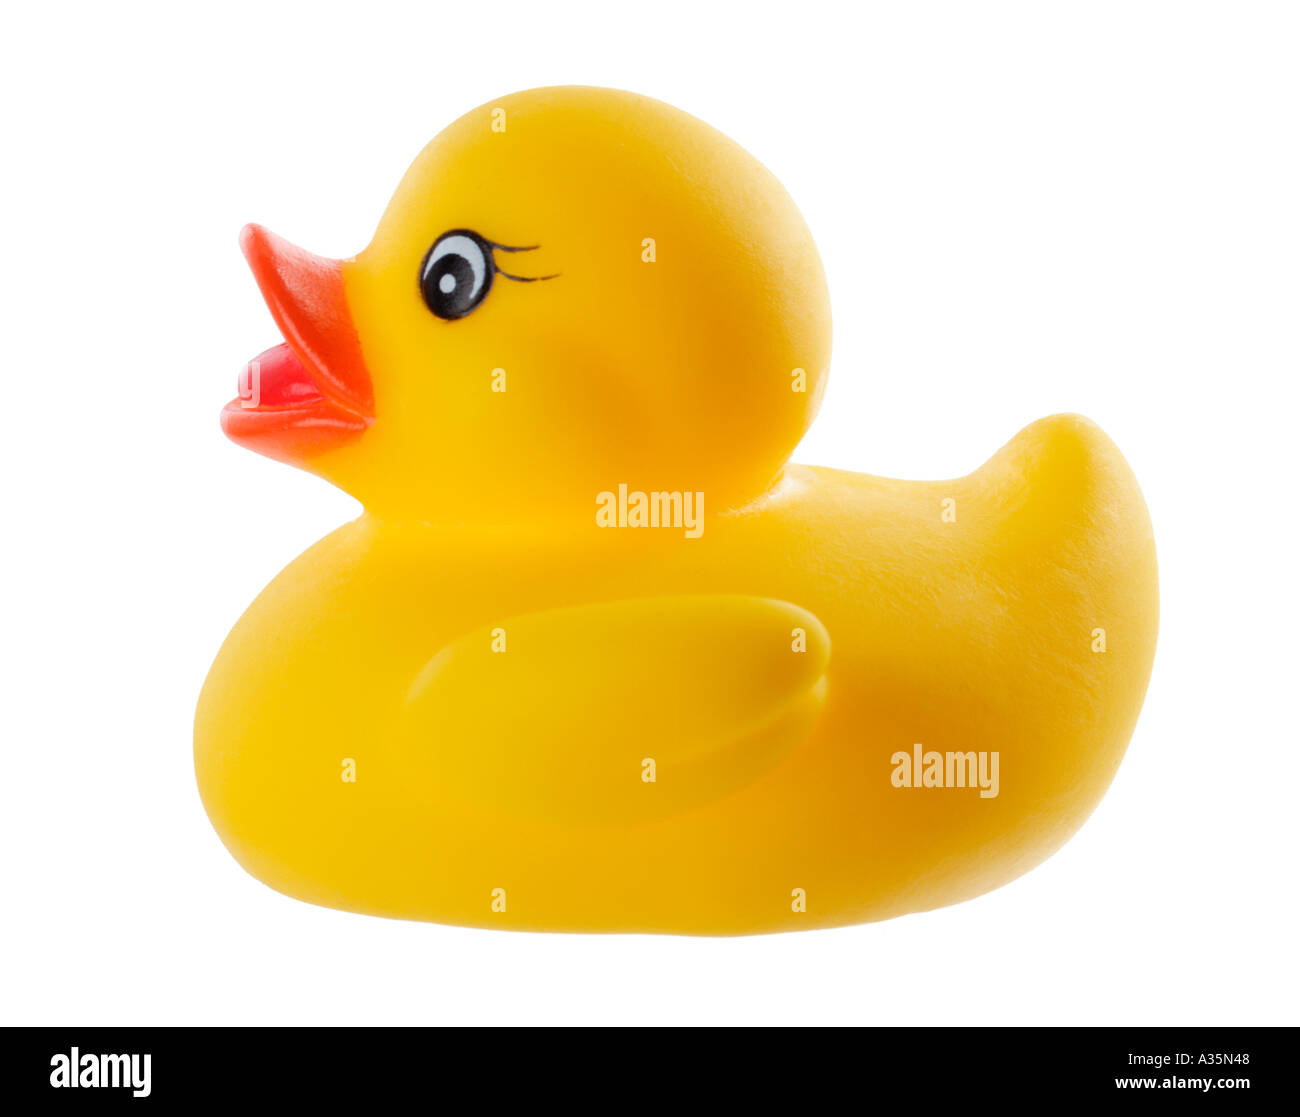 Rubber Duckie Stock Photo